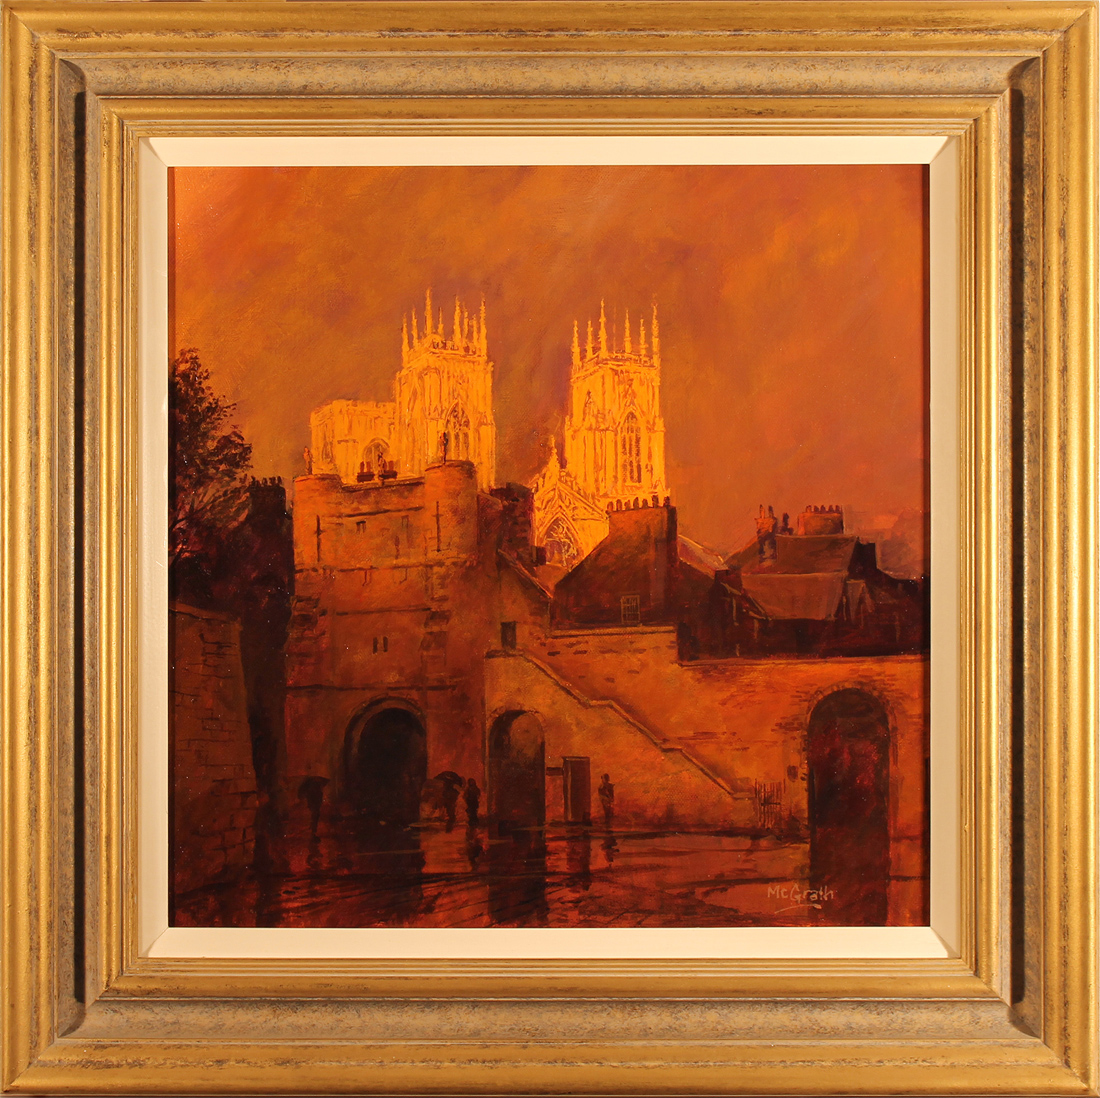 Stephen McGrath, Original oil painting on canvas, Sunset on The Minster, Bootham Bar, York. Click to enlarge